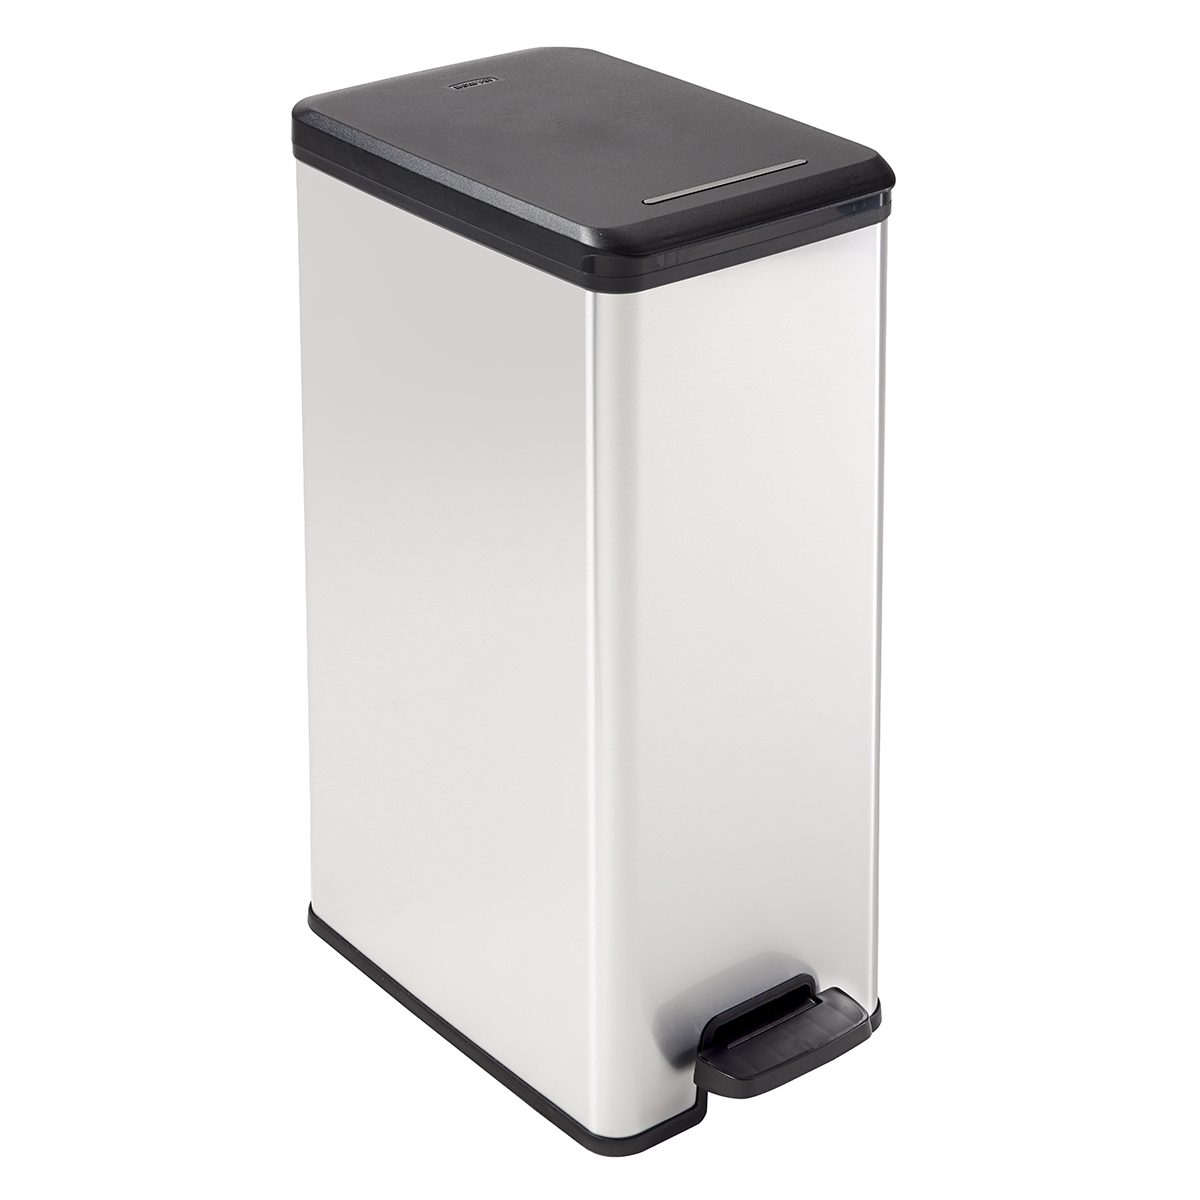 10.5 gal. Deco Slim Step-Open Trash Can | The Container Store